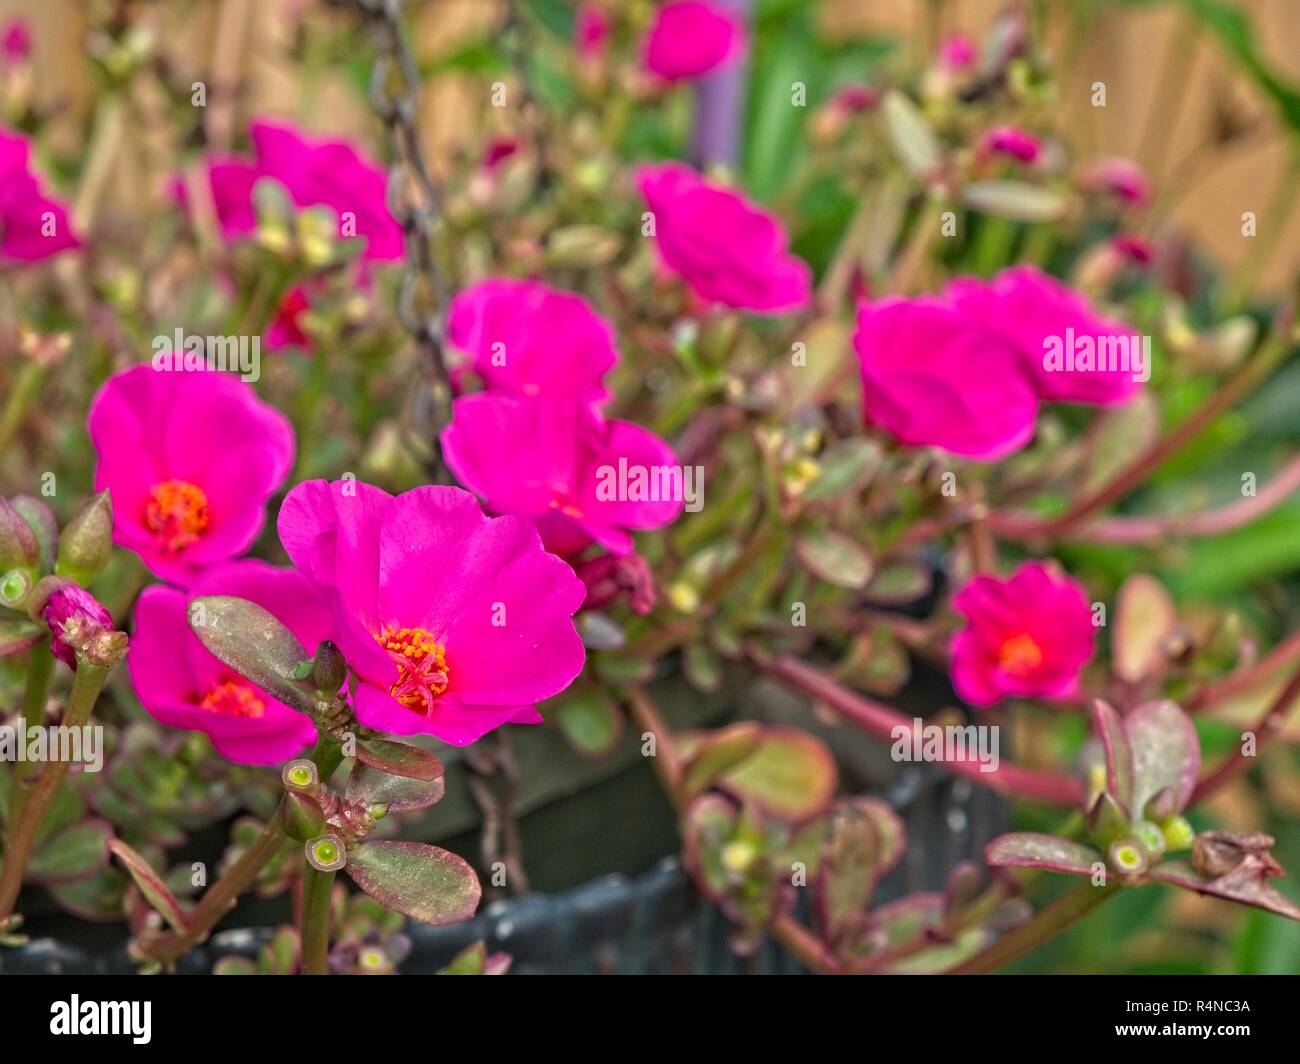 Portulaca grandiflora, rose moss or Mexican rose, a flowering succulent plant popular for hanging baskets in a home garden setting. Stock Photo